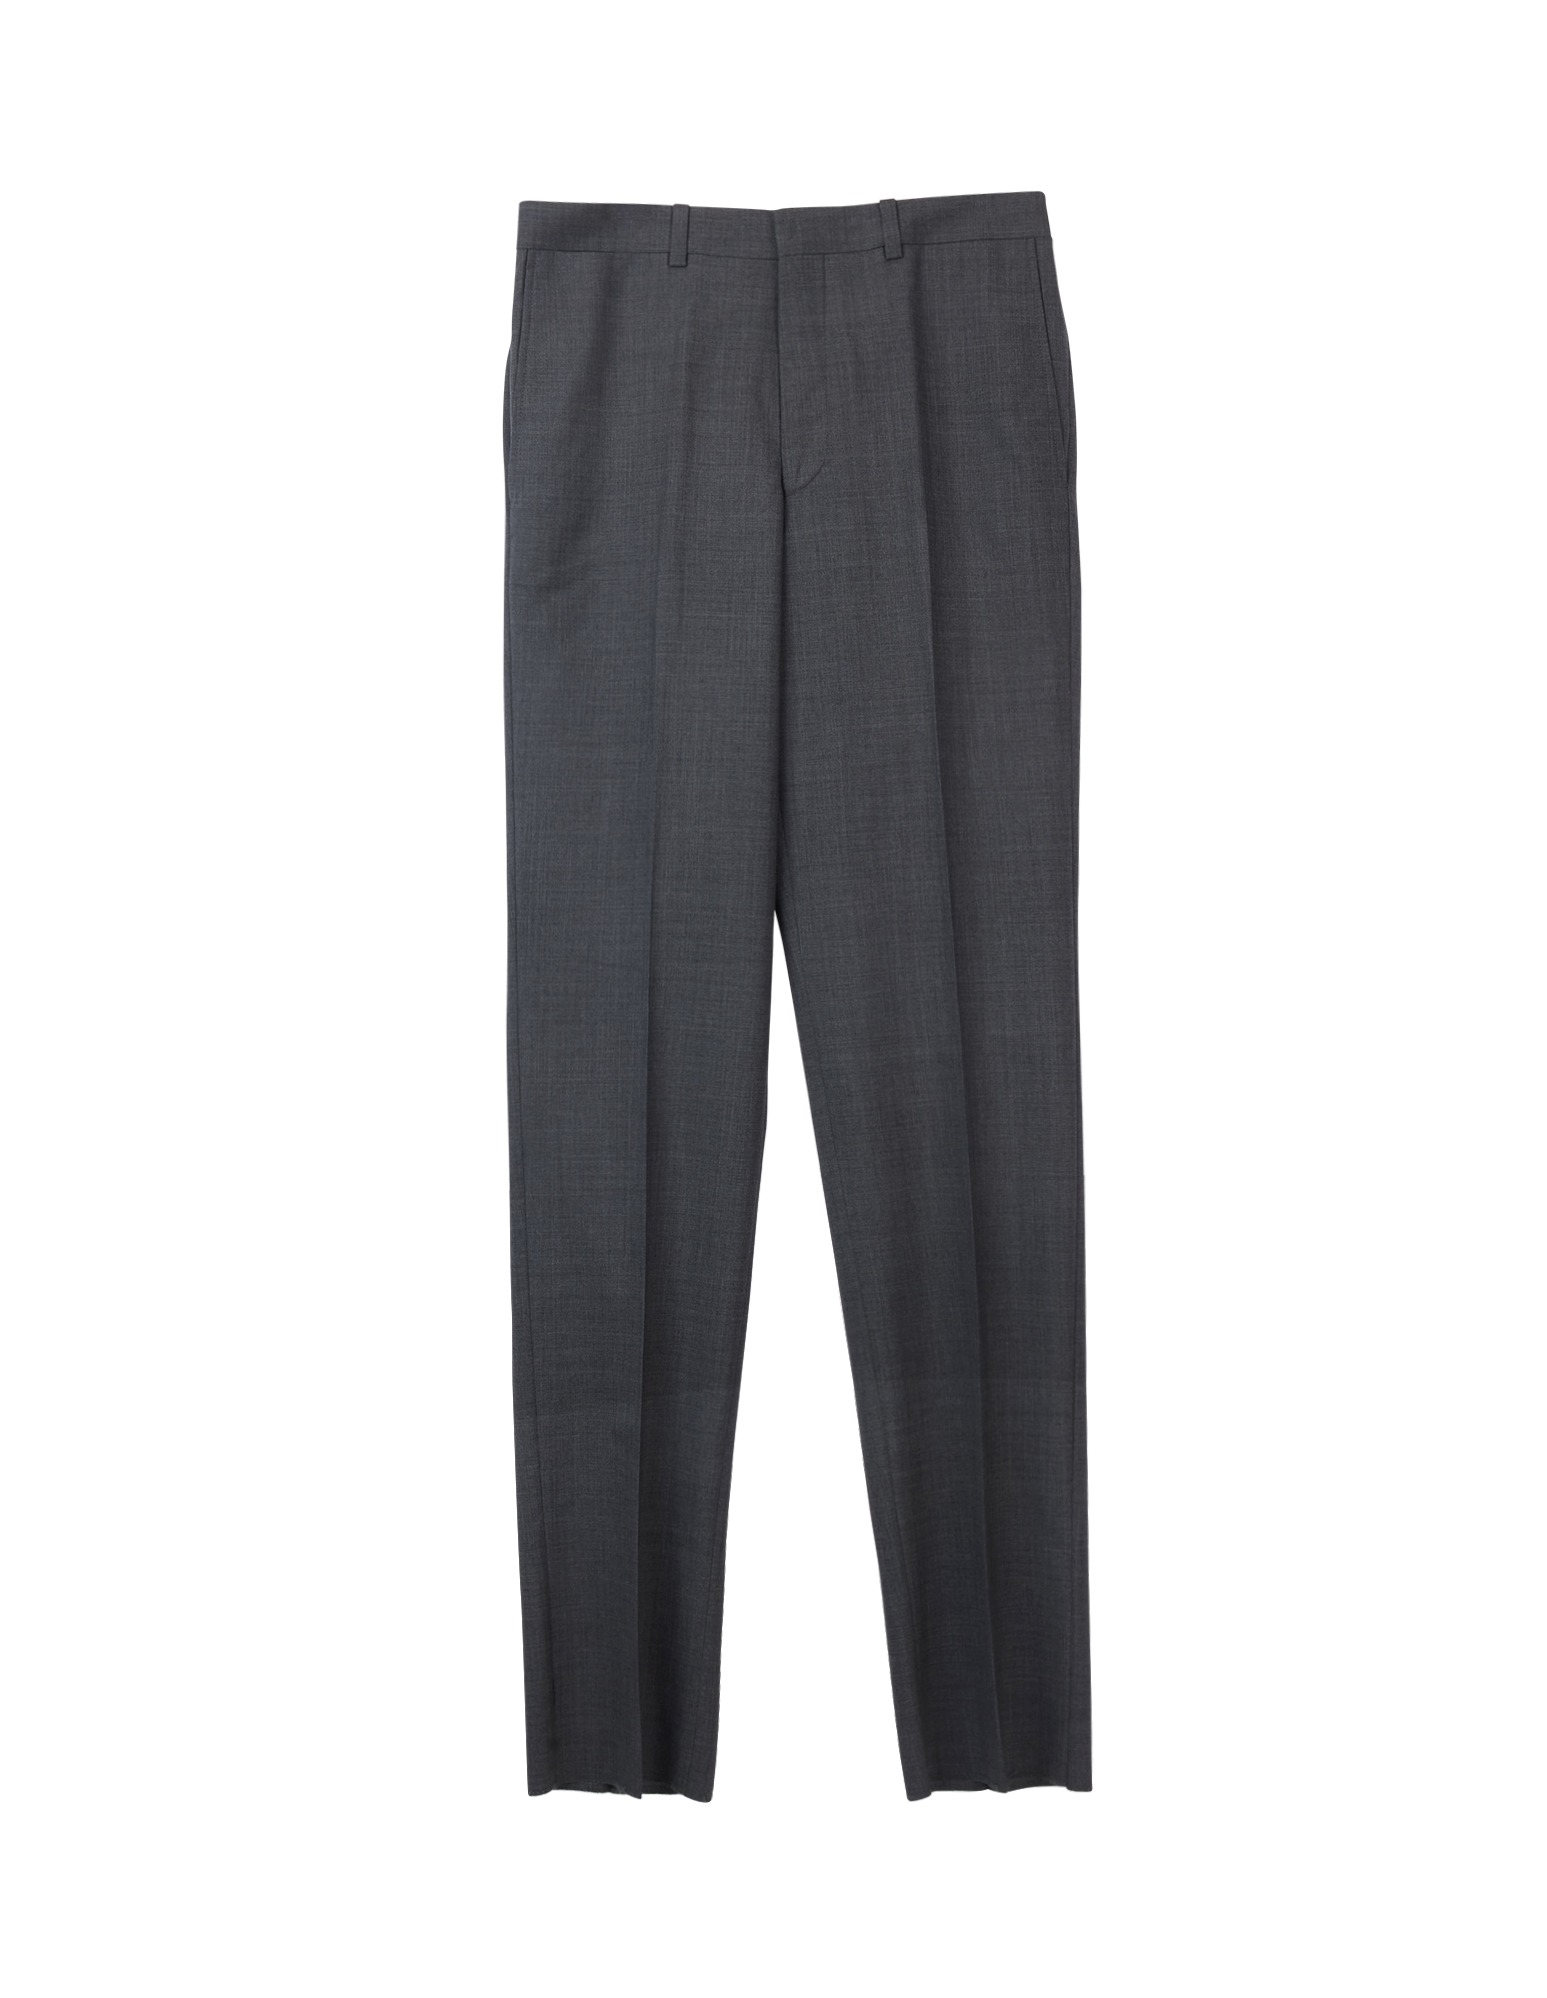 Wool Tropical Trousers (Grey)